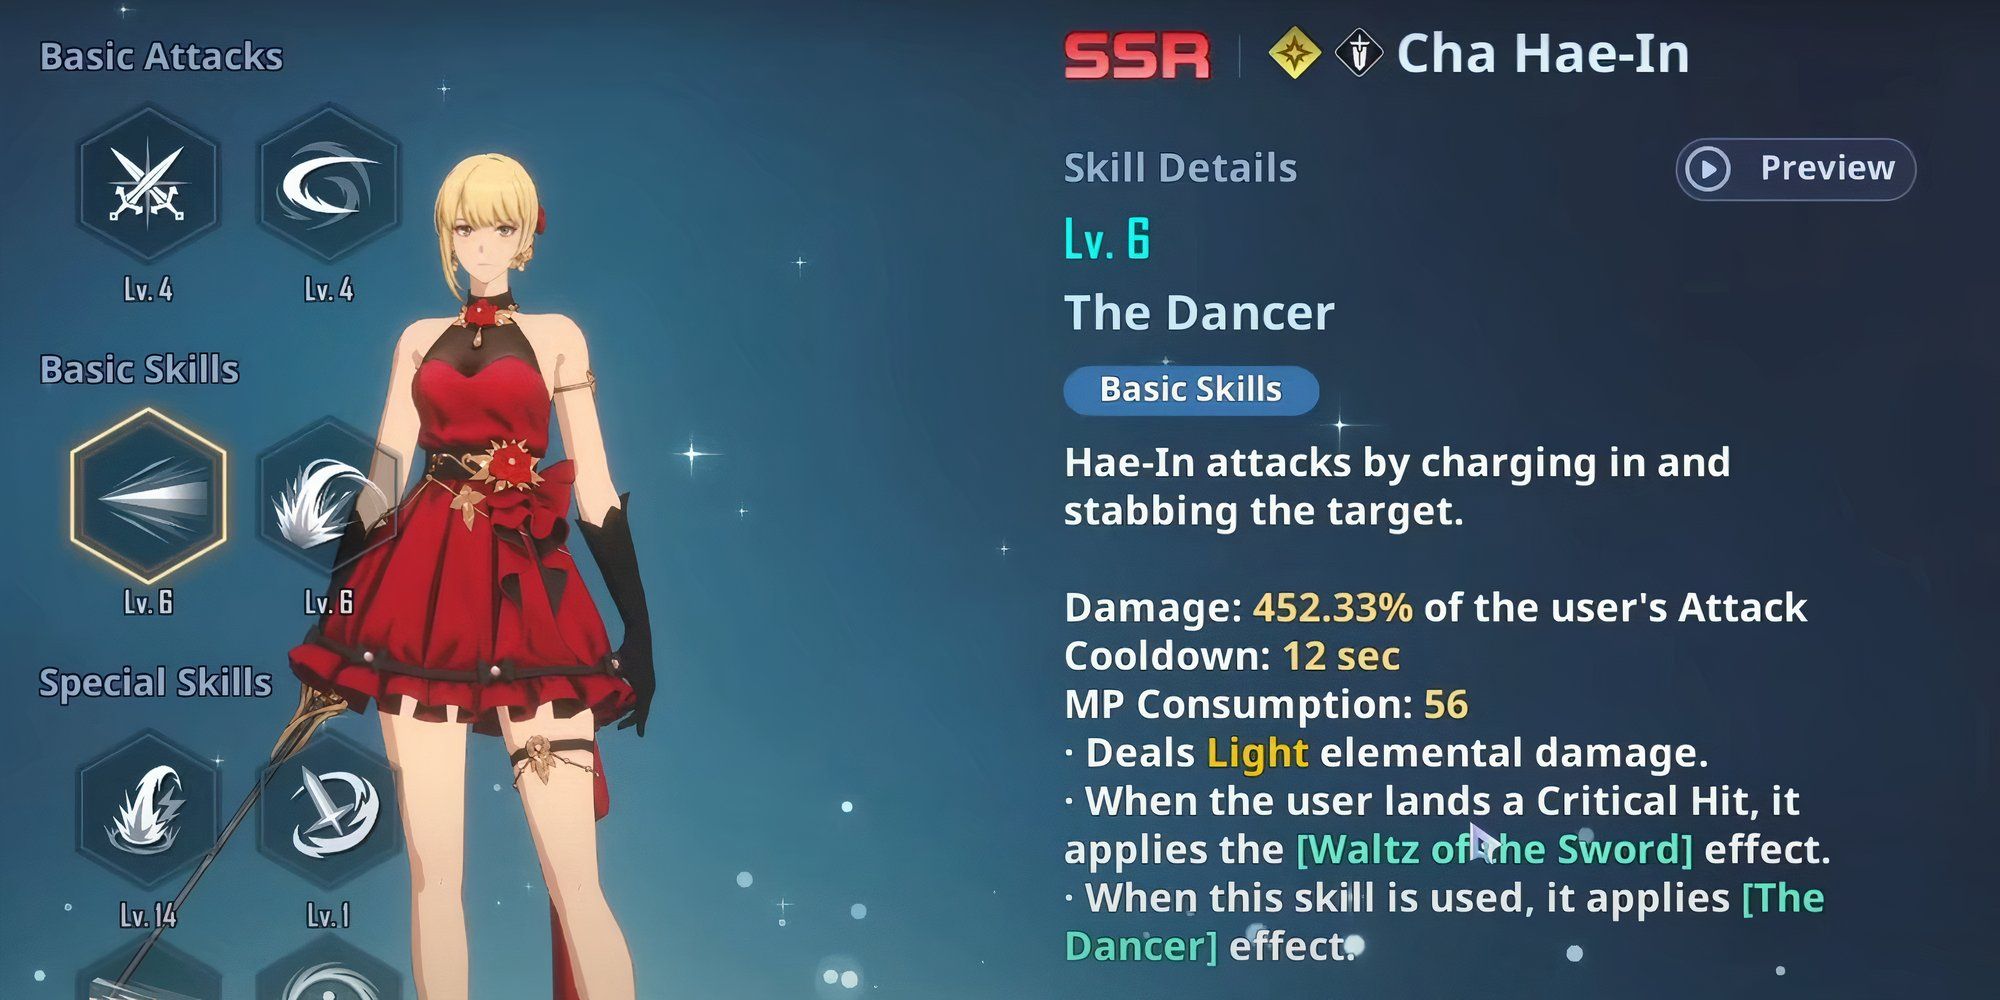 Cha Hae-In Character showcase with her skill details